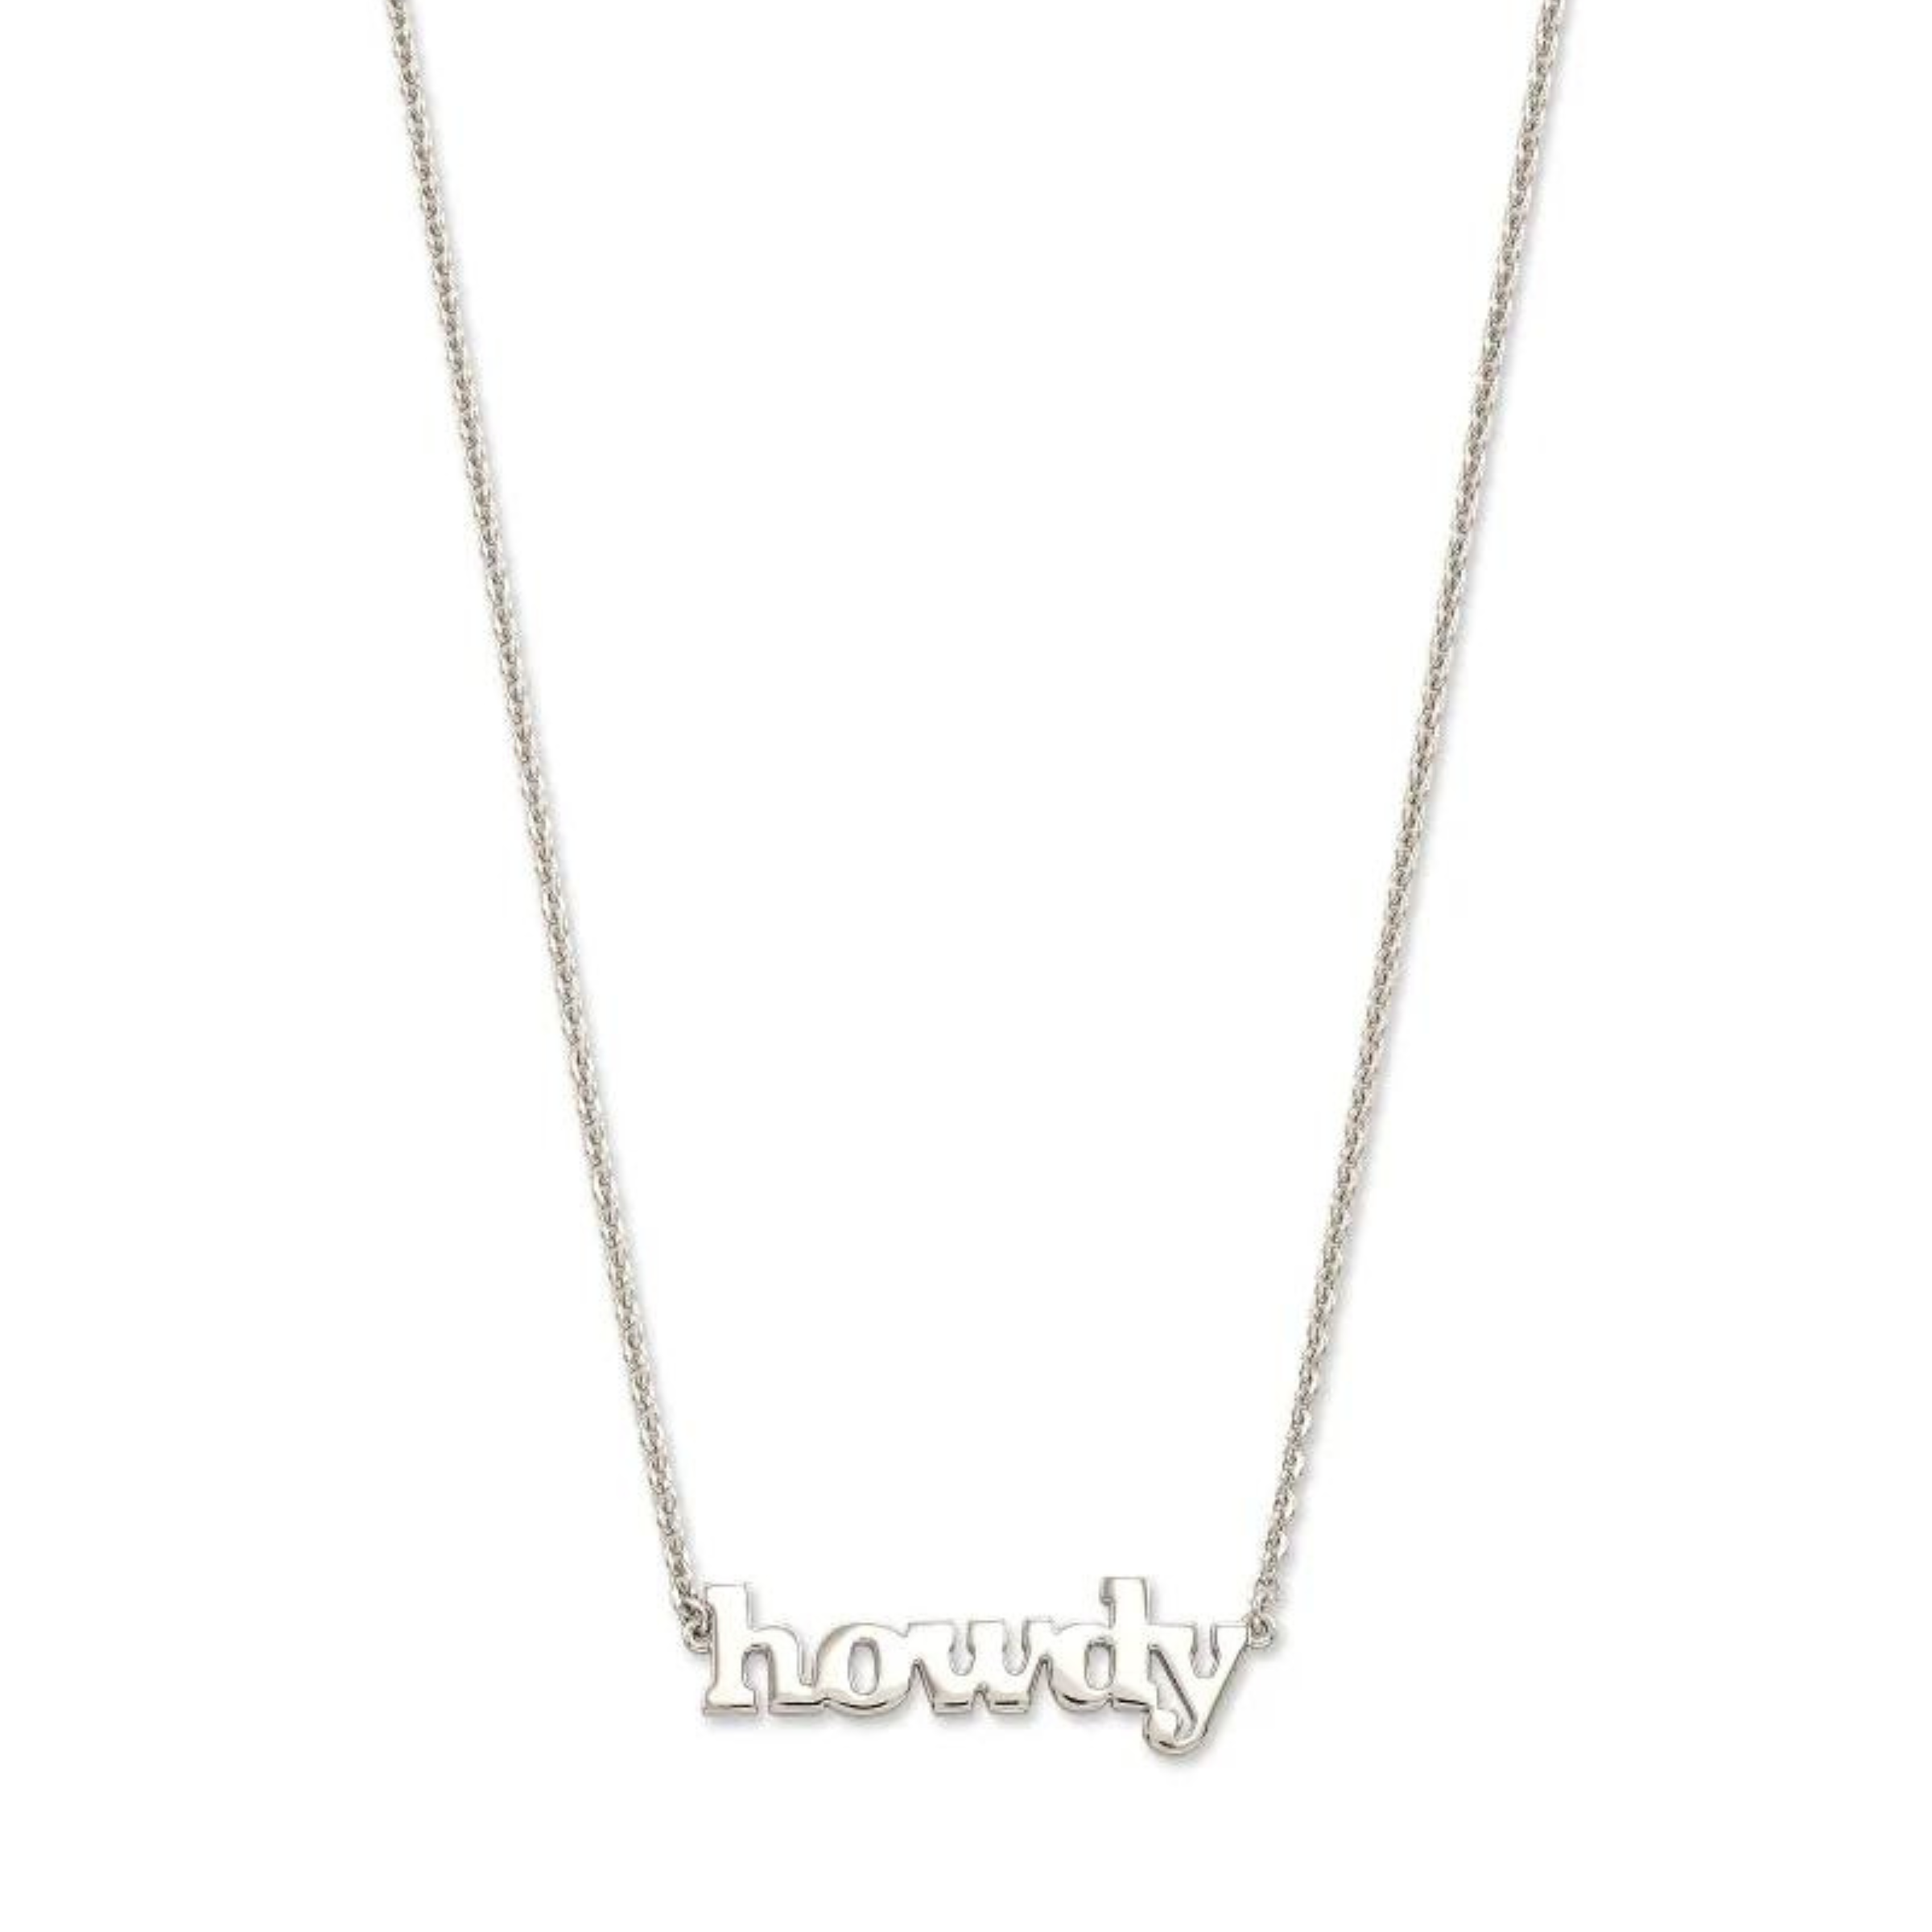 Silver chain necklace with silver "HOWDY" pendant pictured on a white background. 